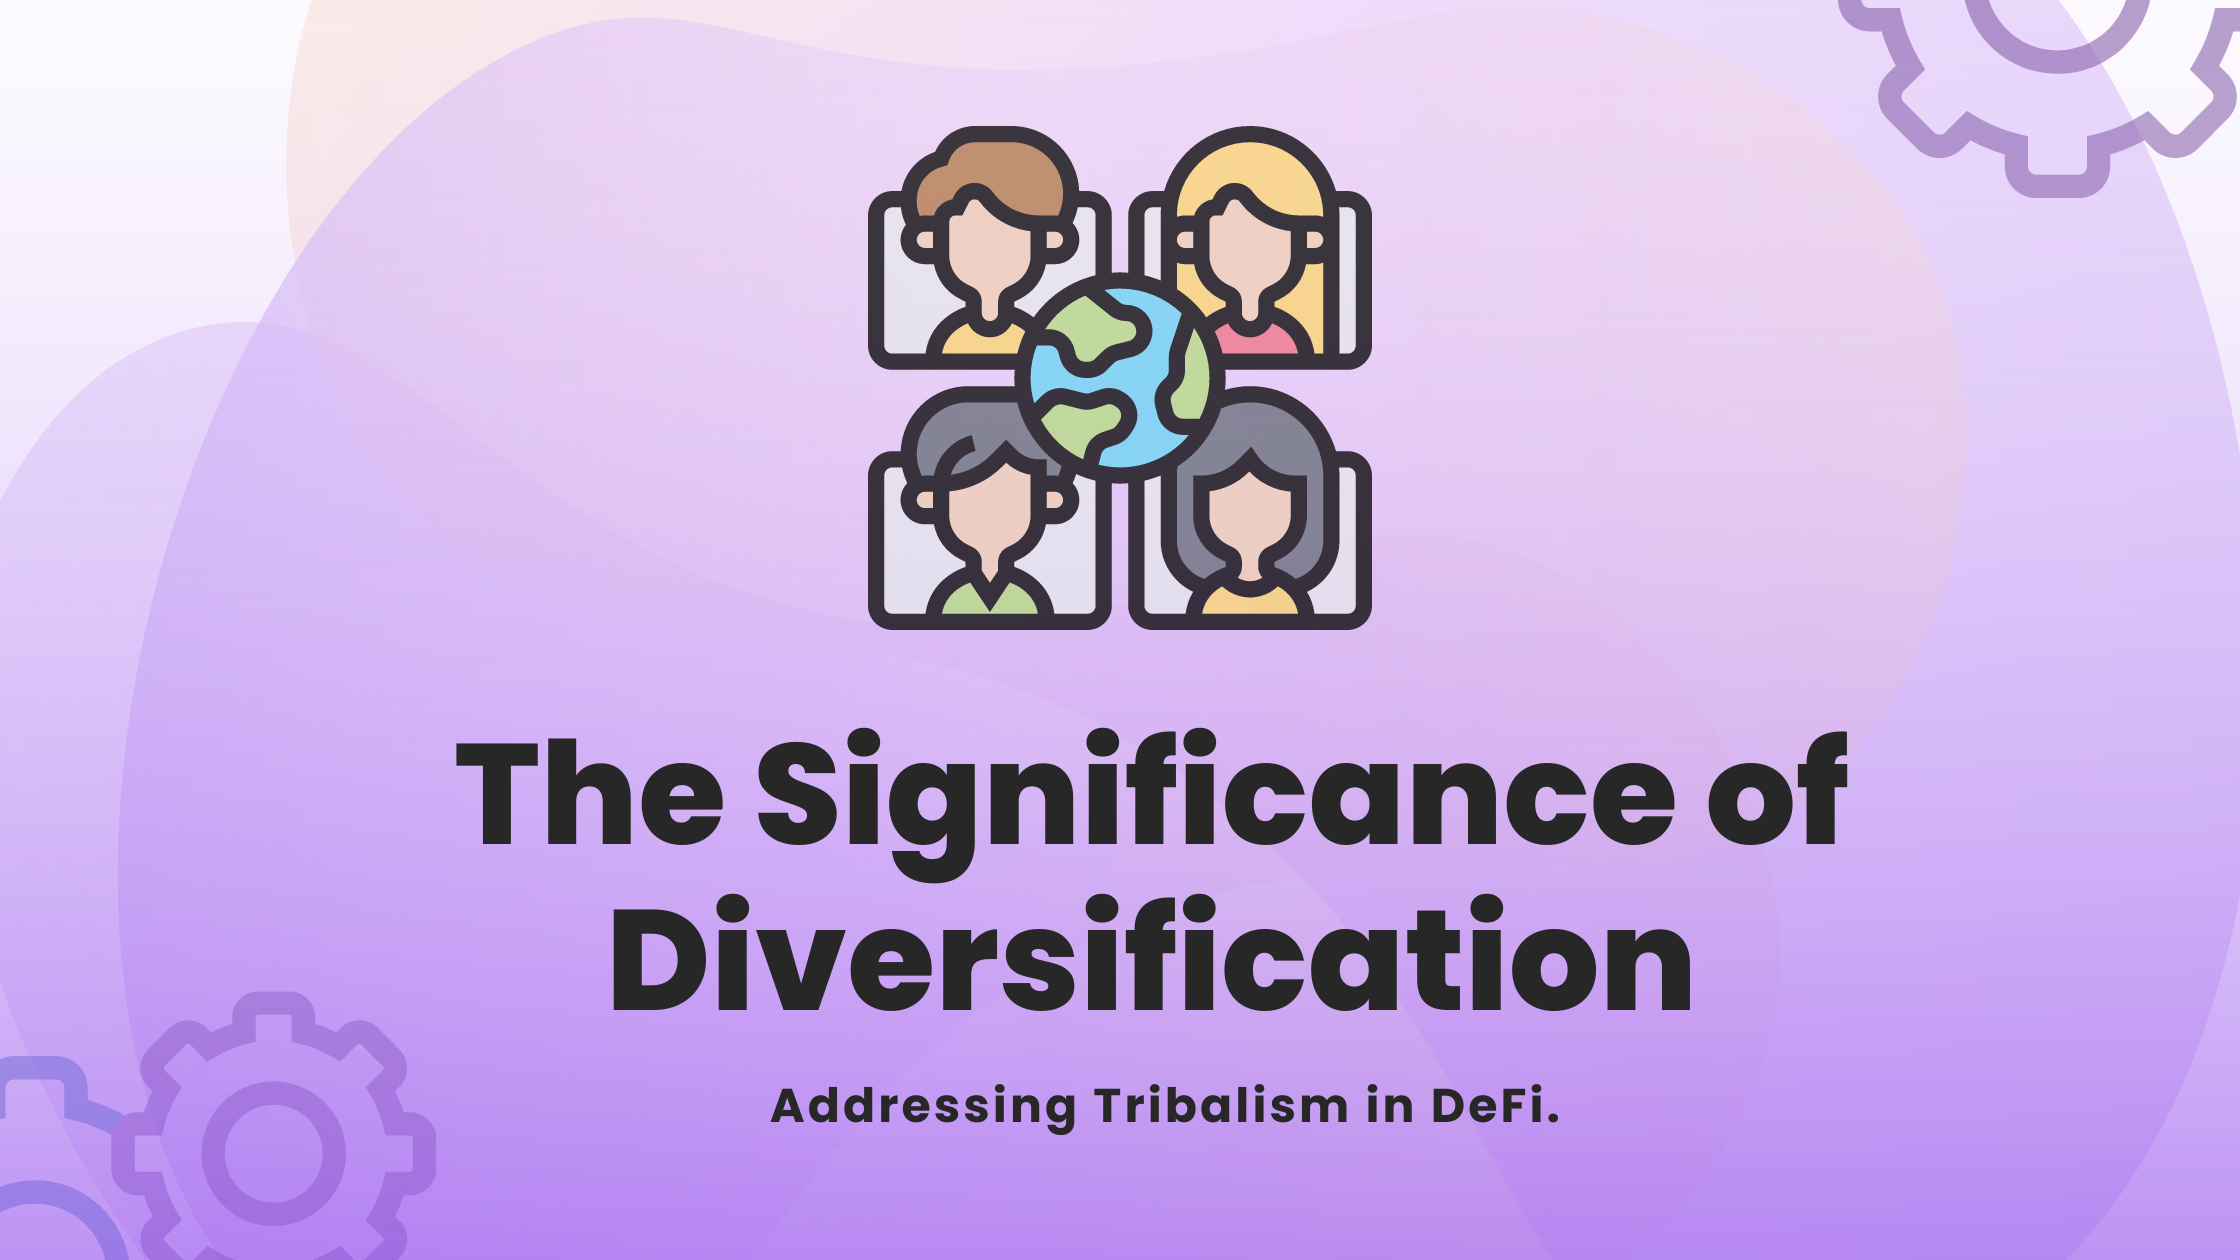 The Significance of Diversification: Addressing Tribalism in DeFi